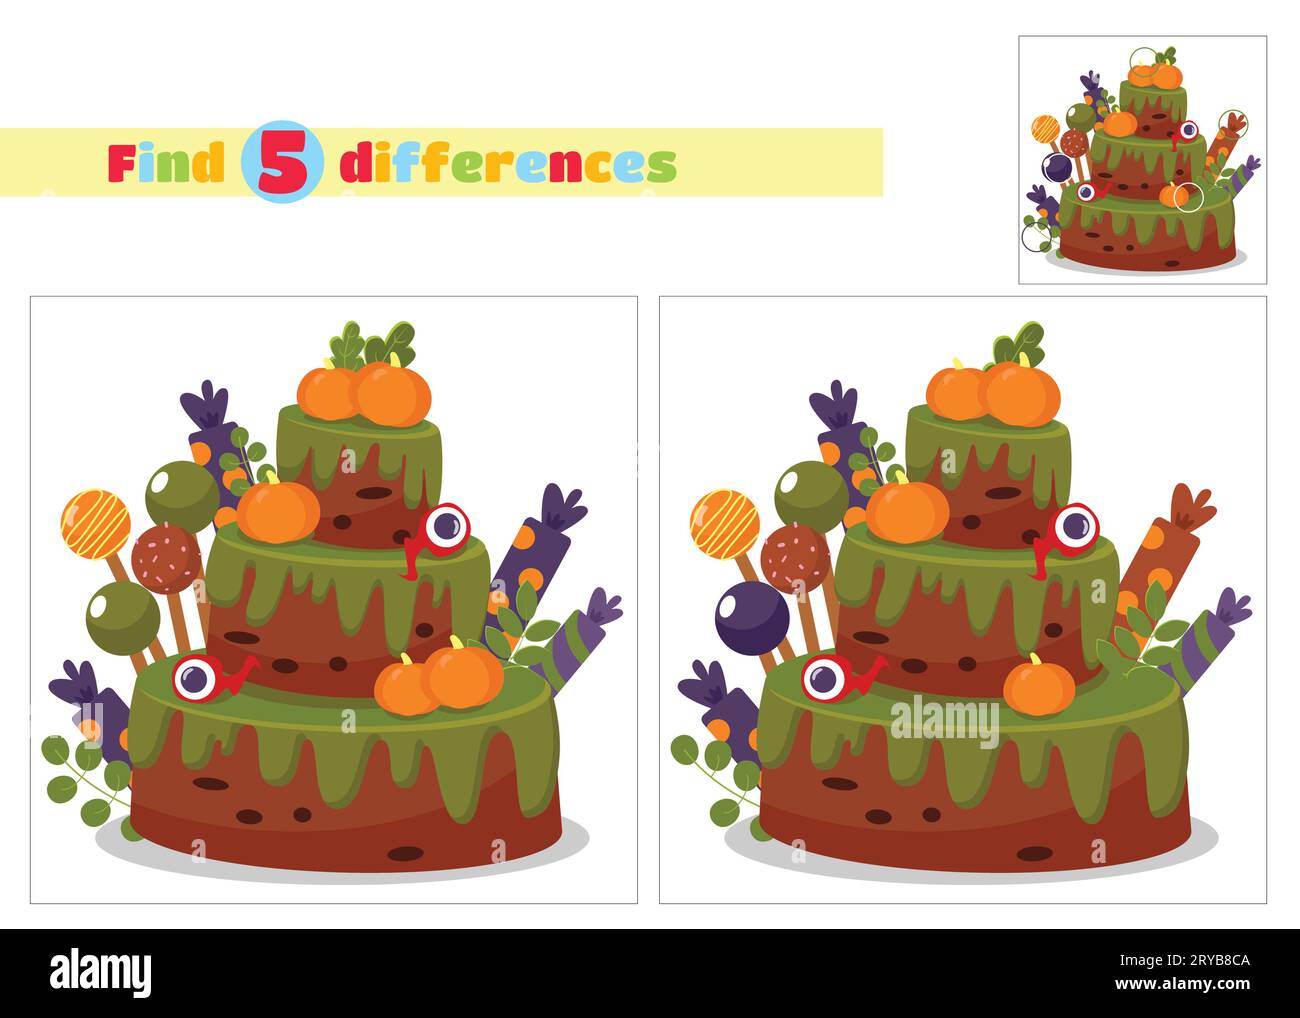 Find the differences. Halloween cake three tiers in cartoon style isolated on white background. Vector illustration for design of Halloween party, hol Stock Vector